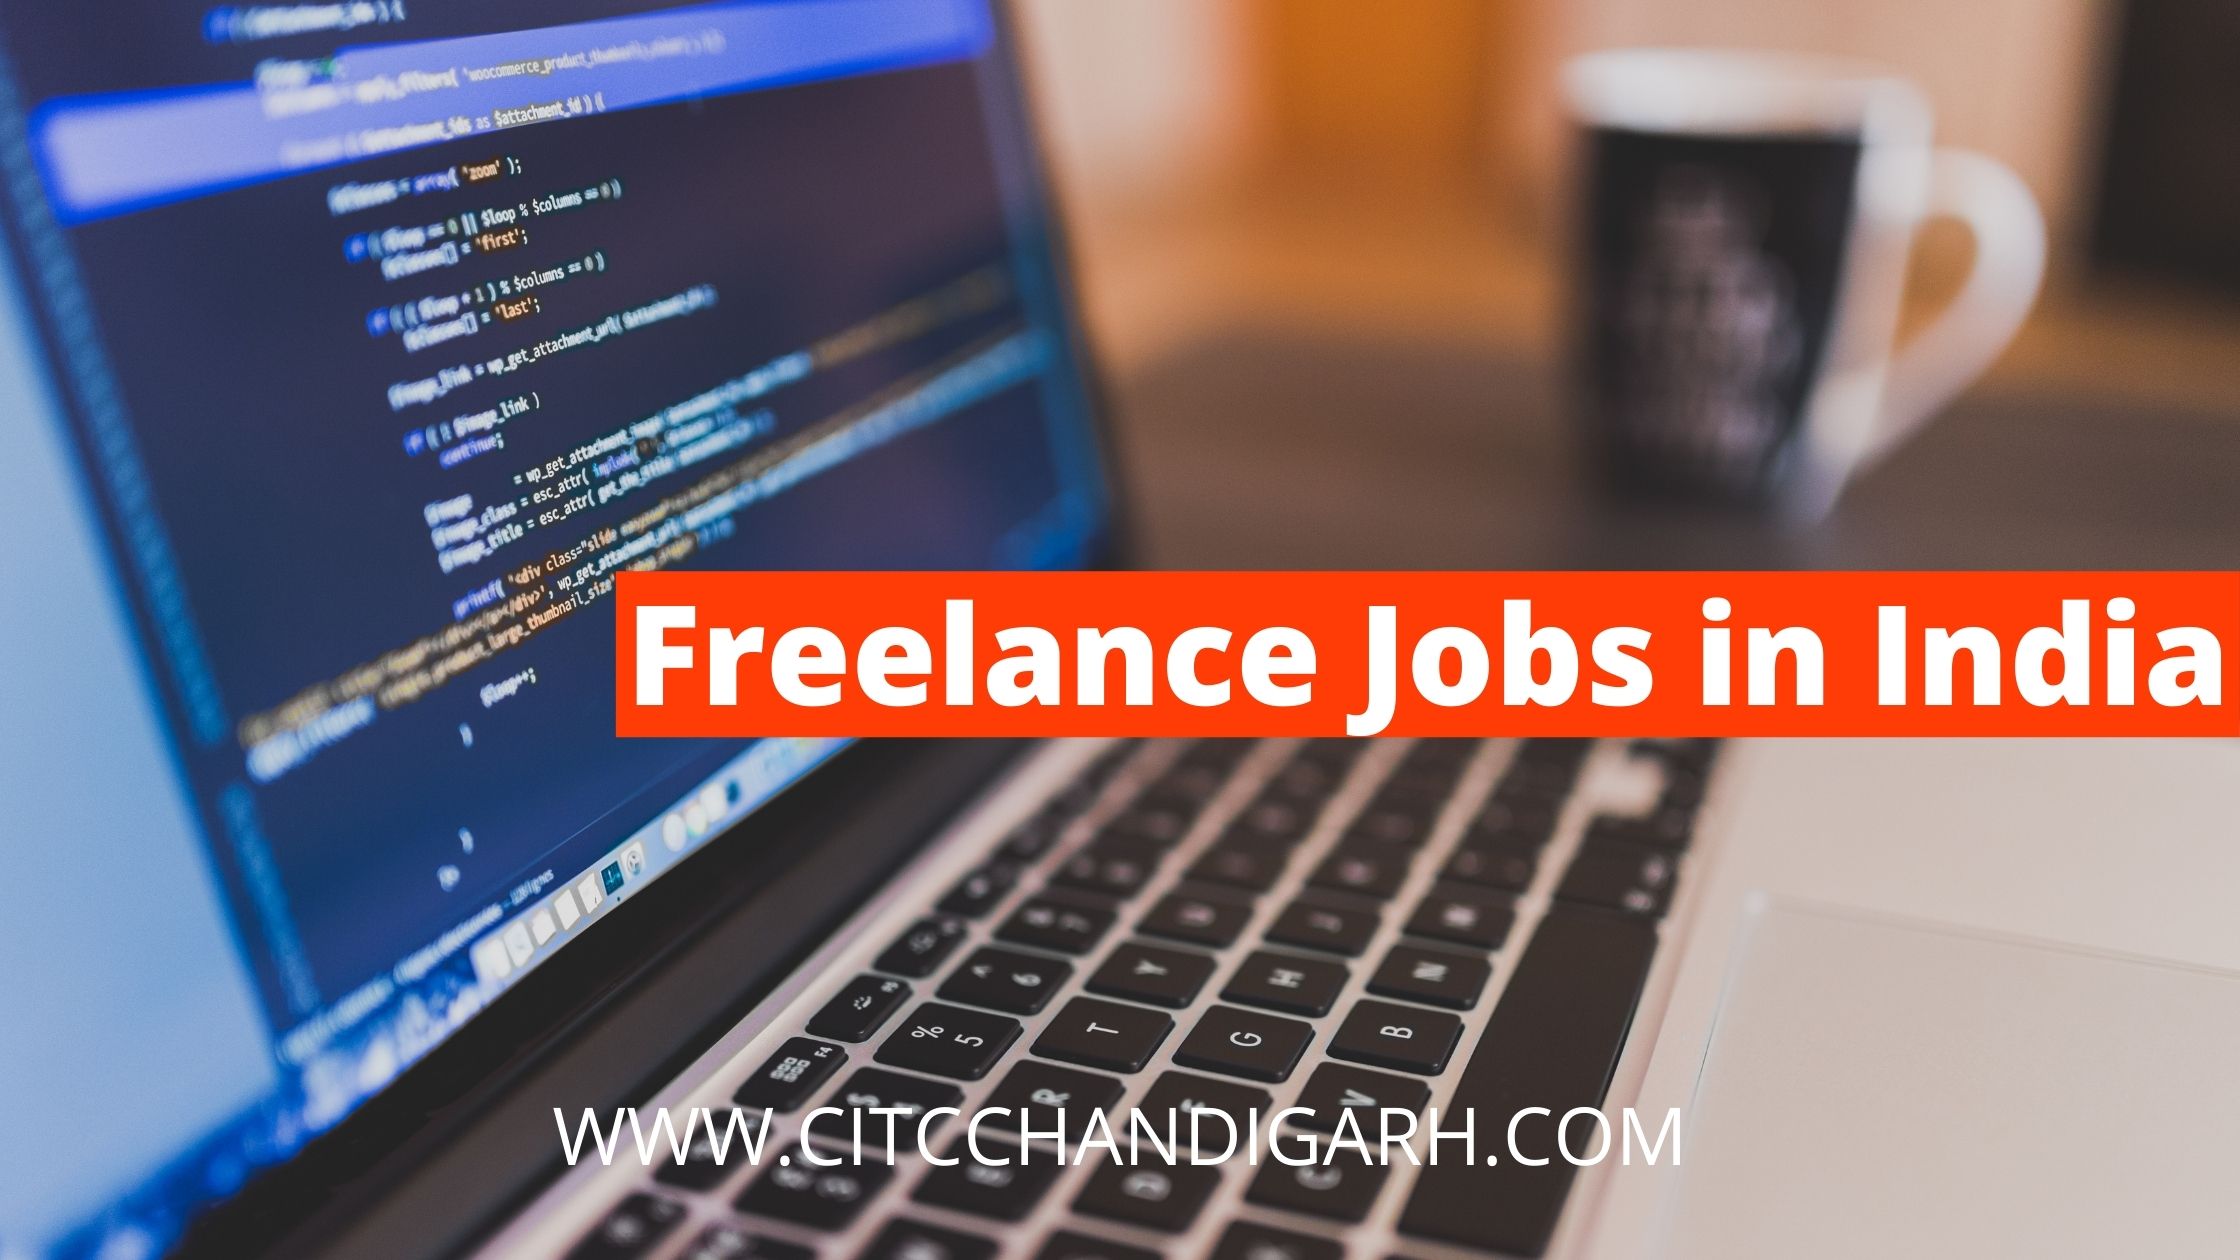 Trying to find freelance jobs in INDIA?